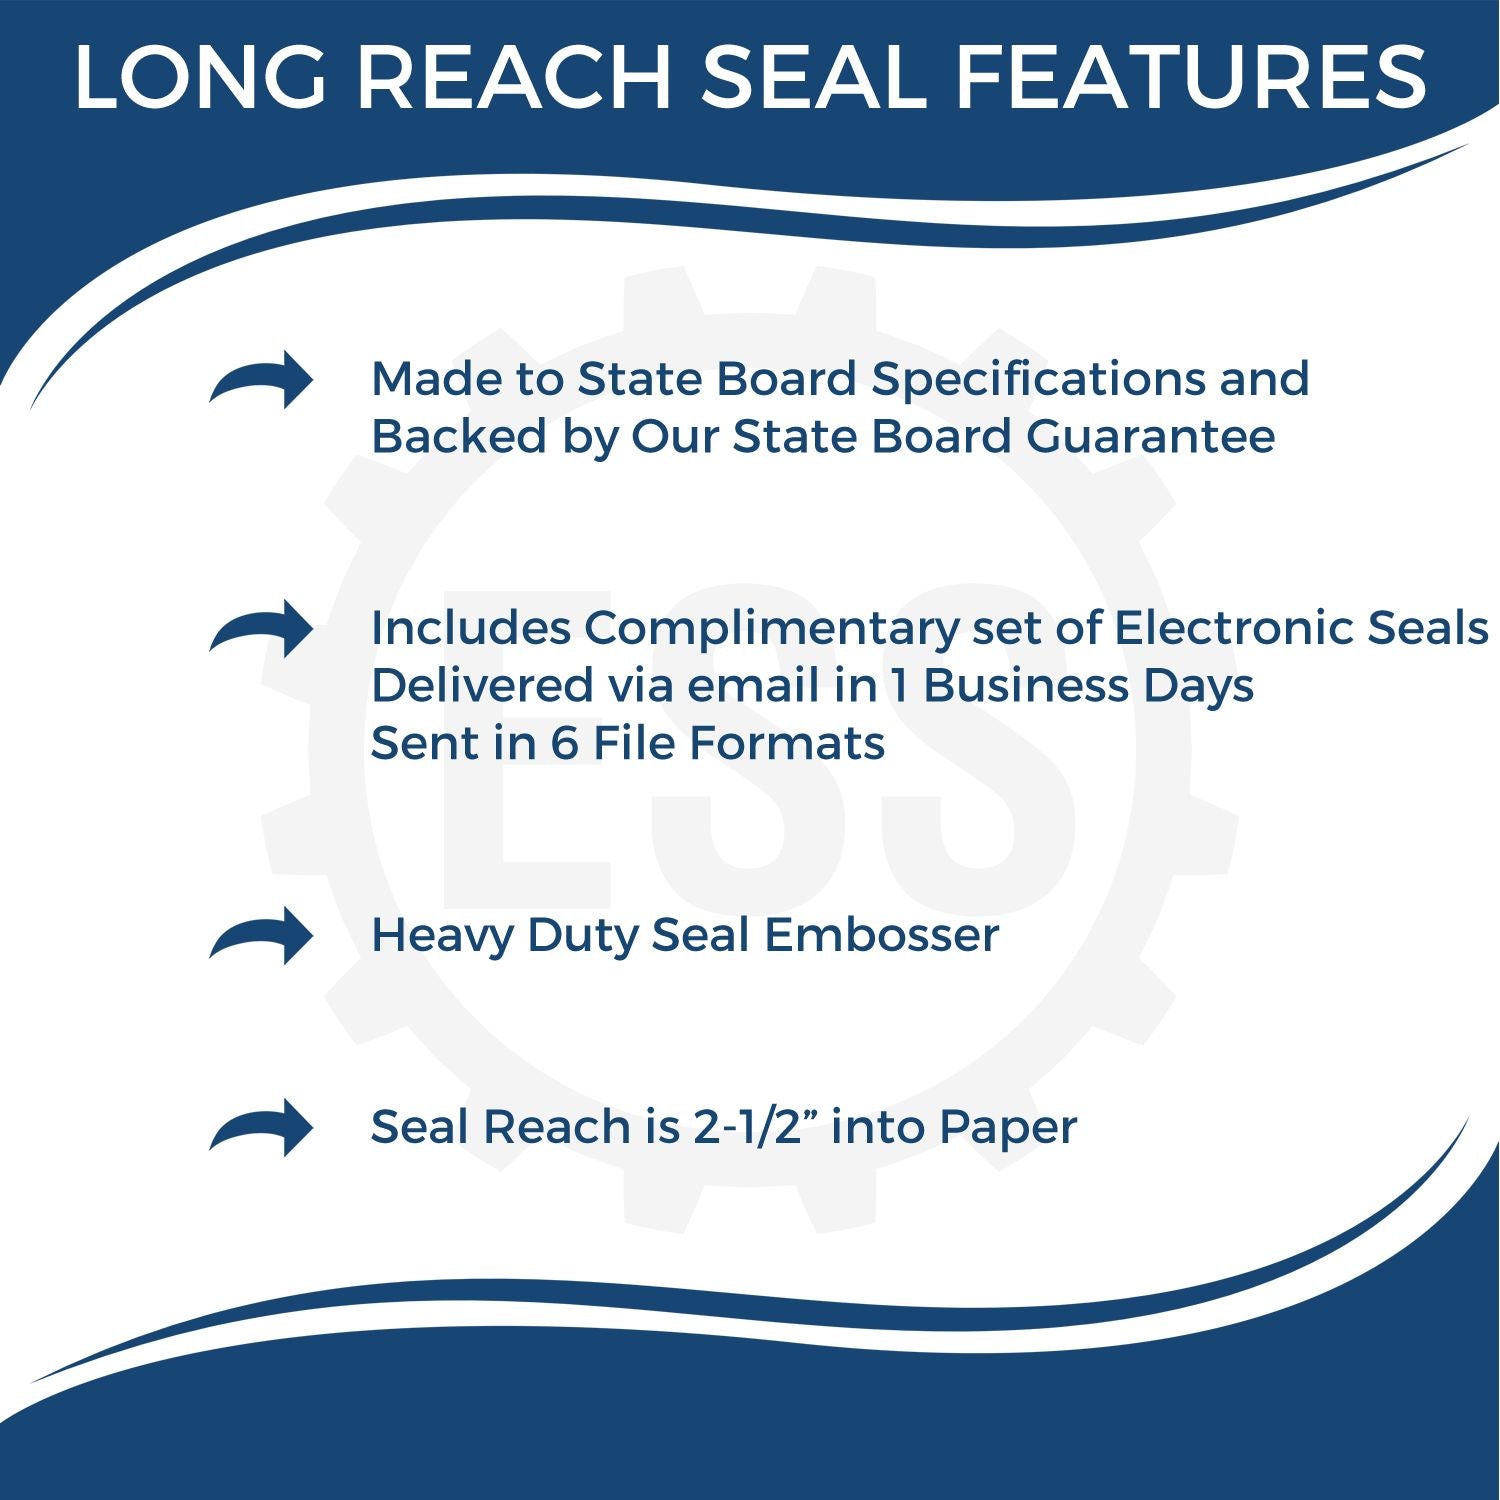 The main image for the Long Reach Oklahoma PE Seal depicting a sample of the imprint and electronic files